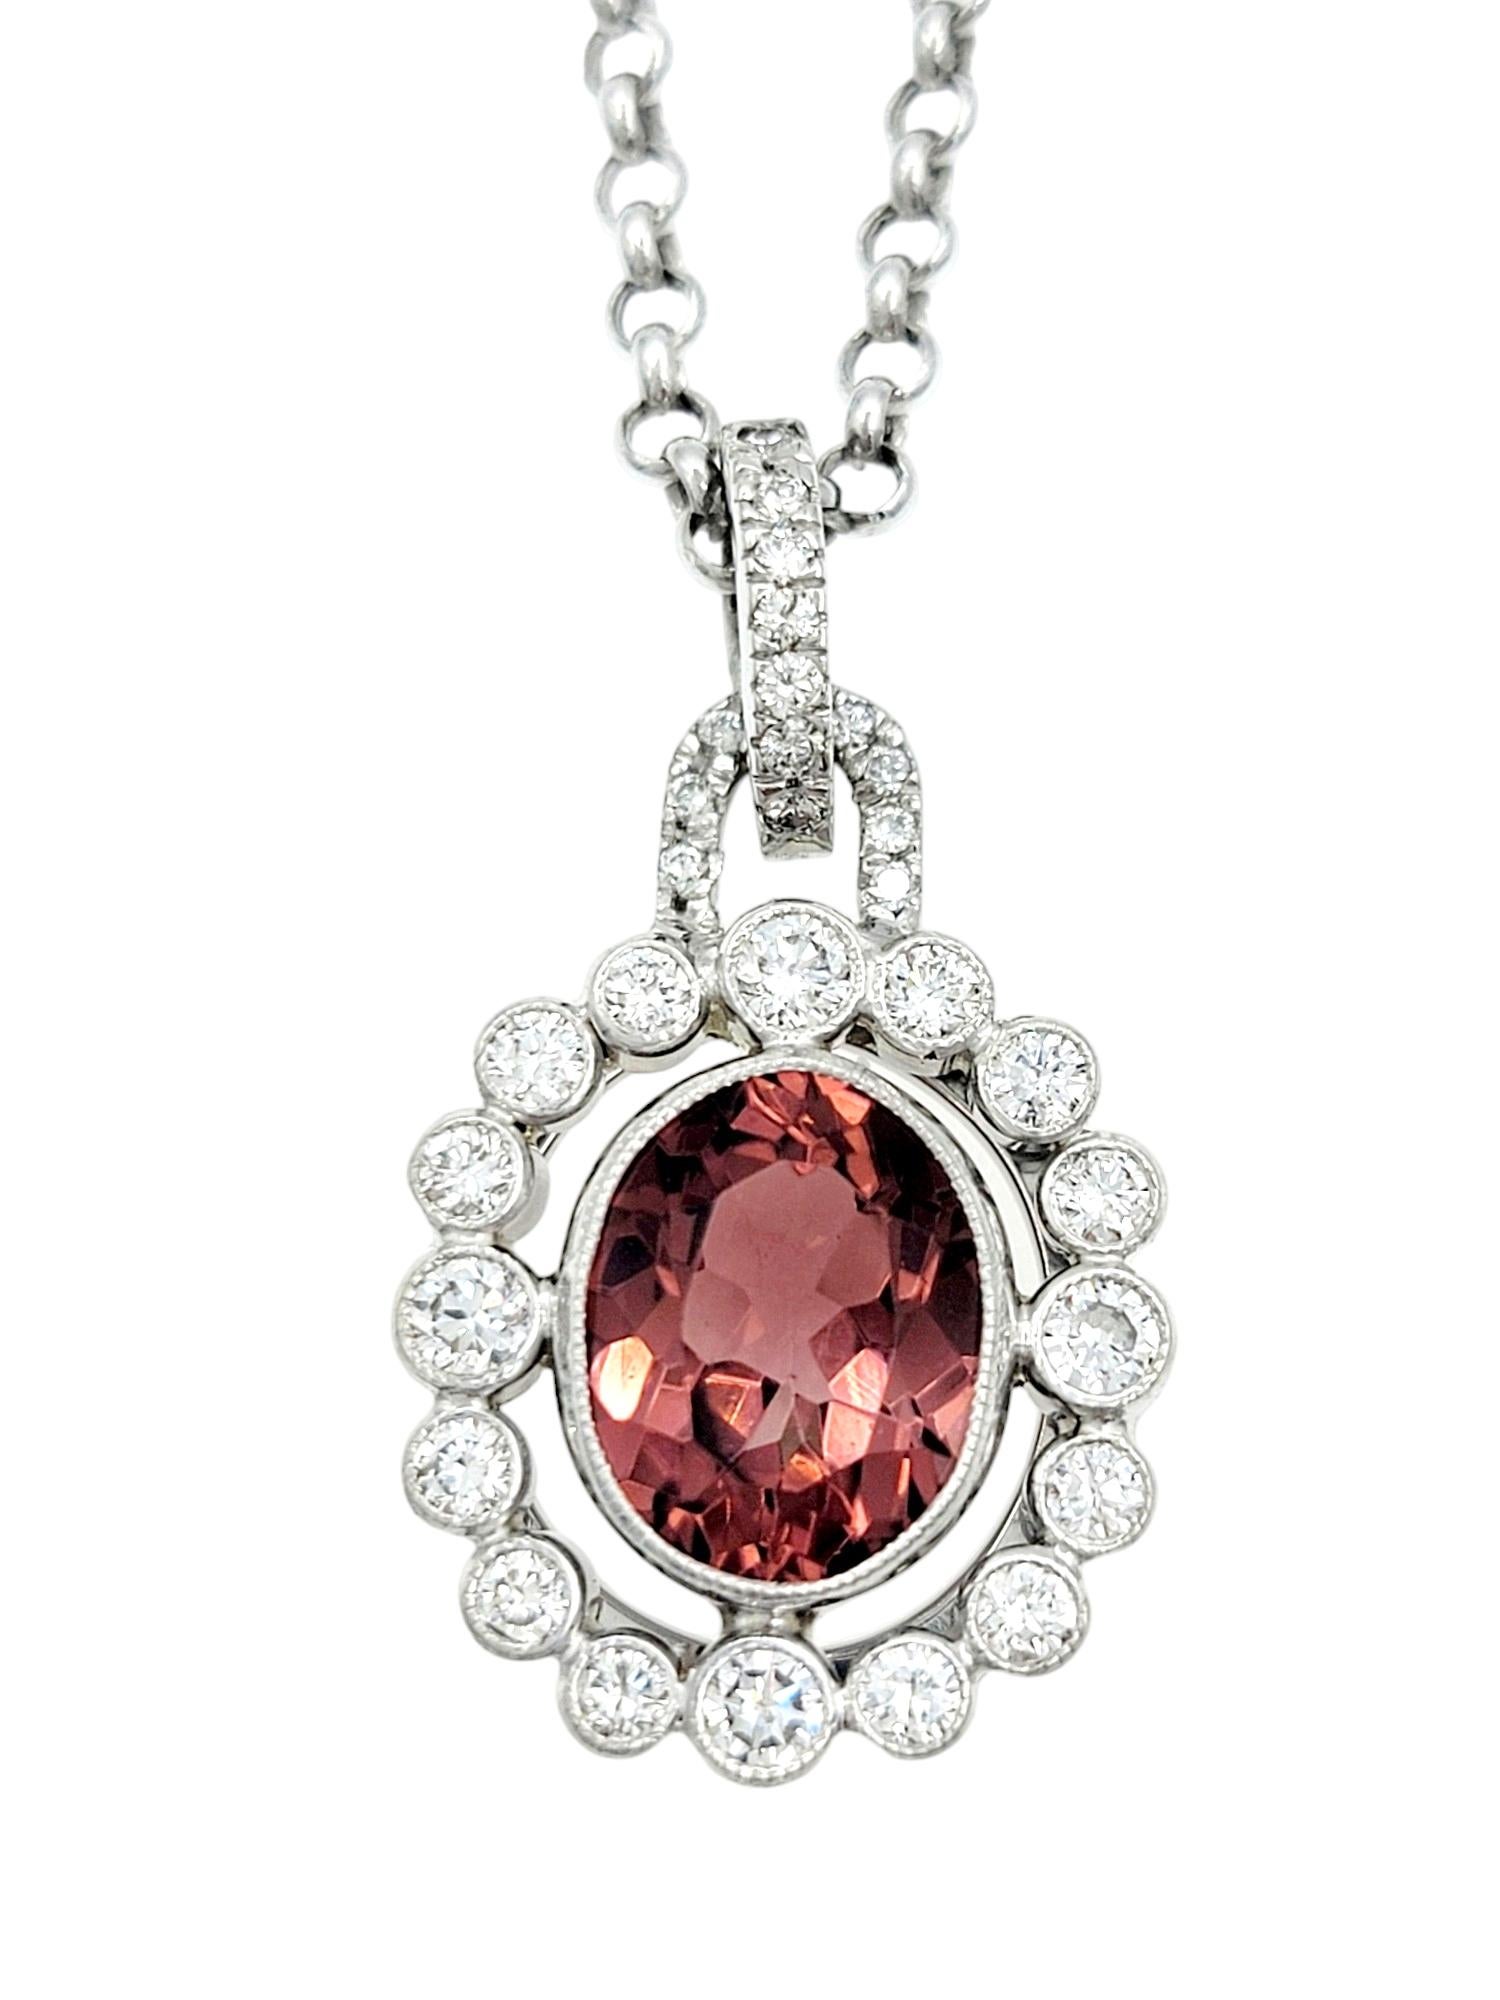 This exquisite pendant necklace features a harmonious blend of tourmaline and diamonds set in white, creating a captivating and elegant piece of jewelry. The oval pink tourmaline takes center stage, radiating a delicate hue and is surrounded by a